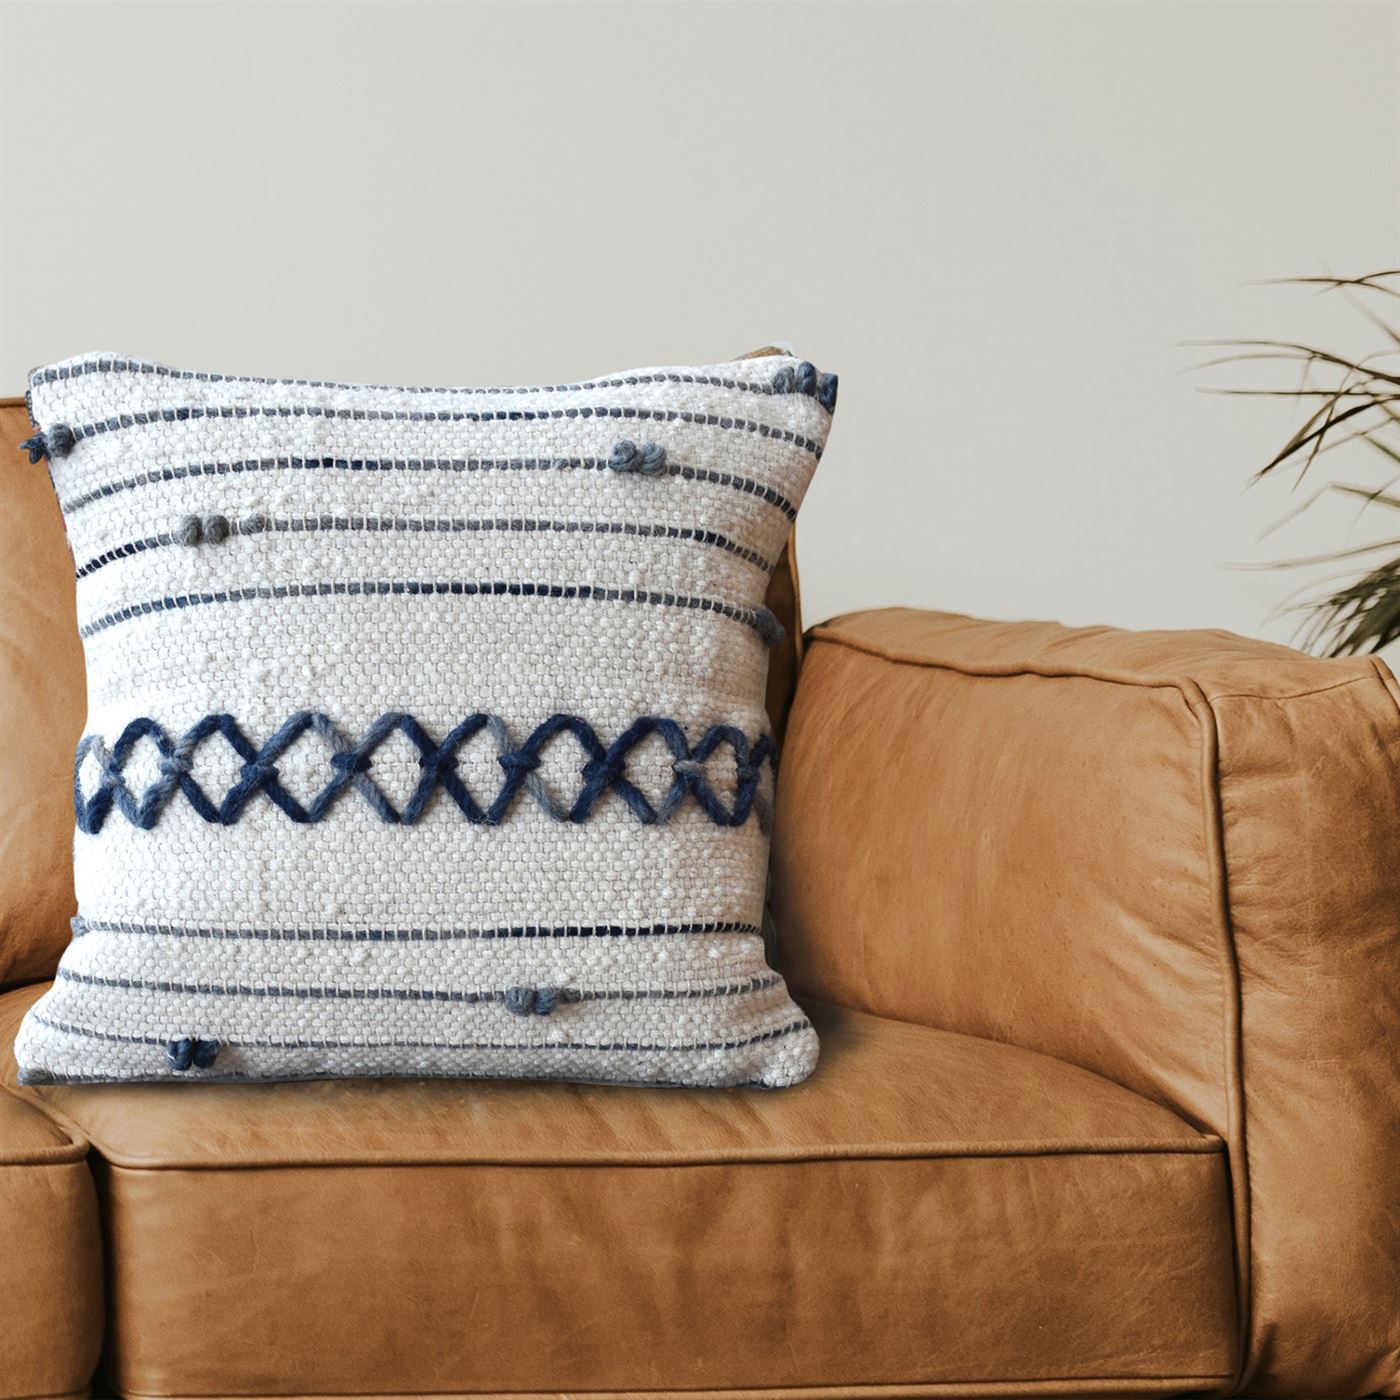 Austral Pillow, Wool, Natural White, Navy, Pitloom, All Loop